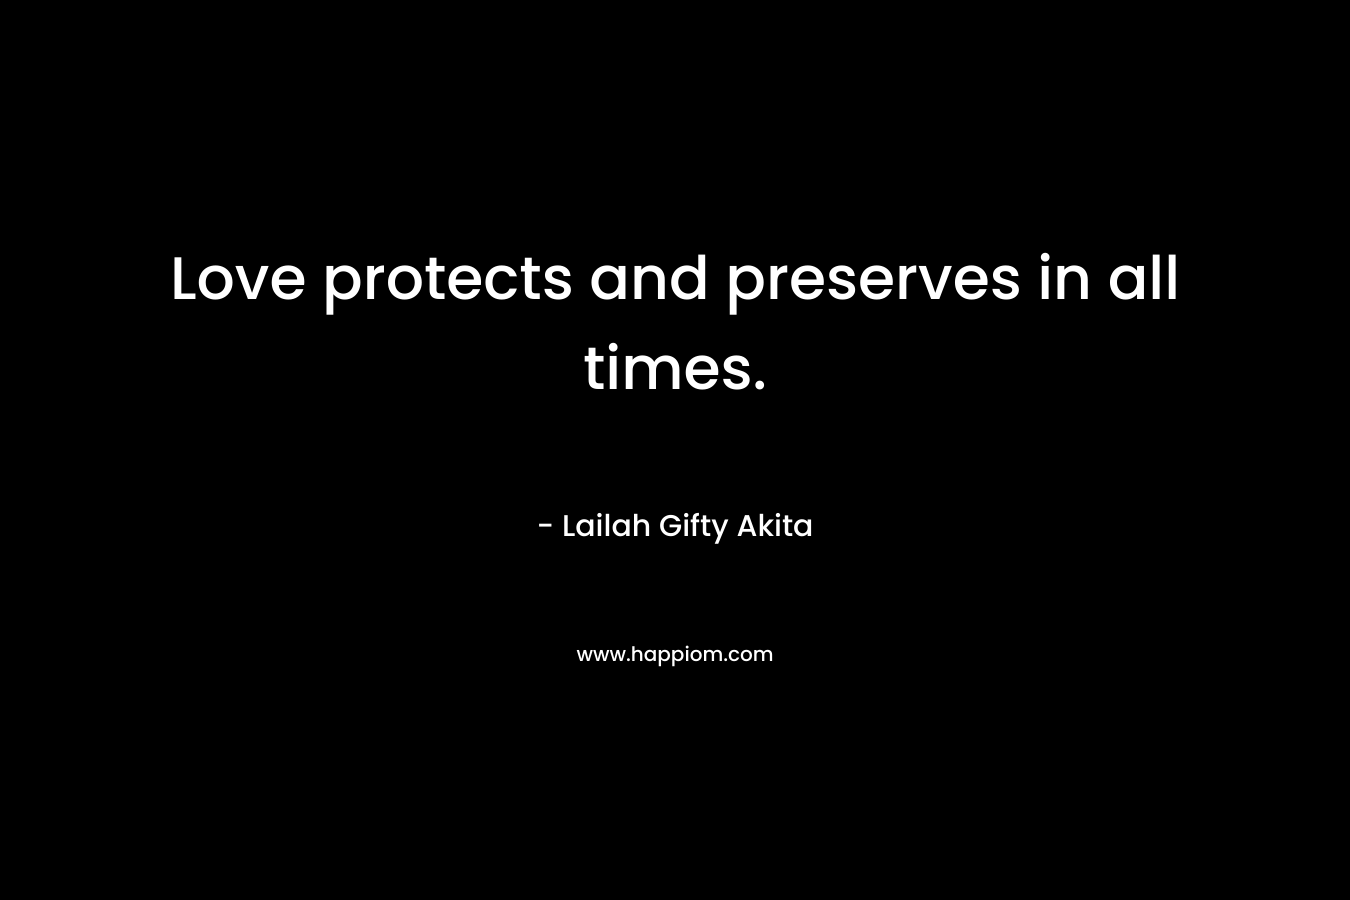 Love protects and preserves in all times. – Lailah Gifty Akita